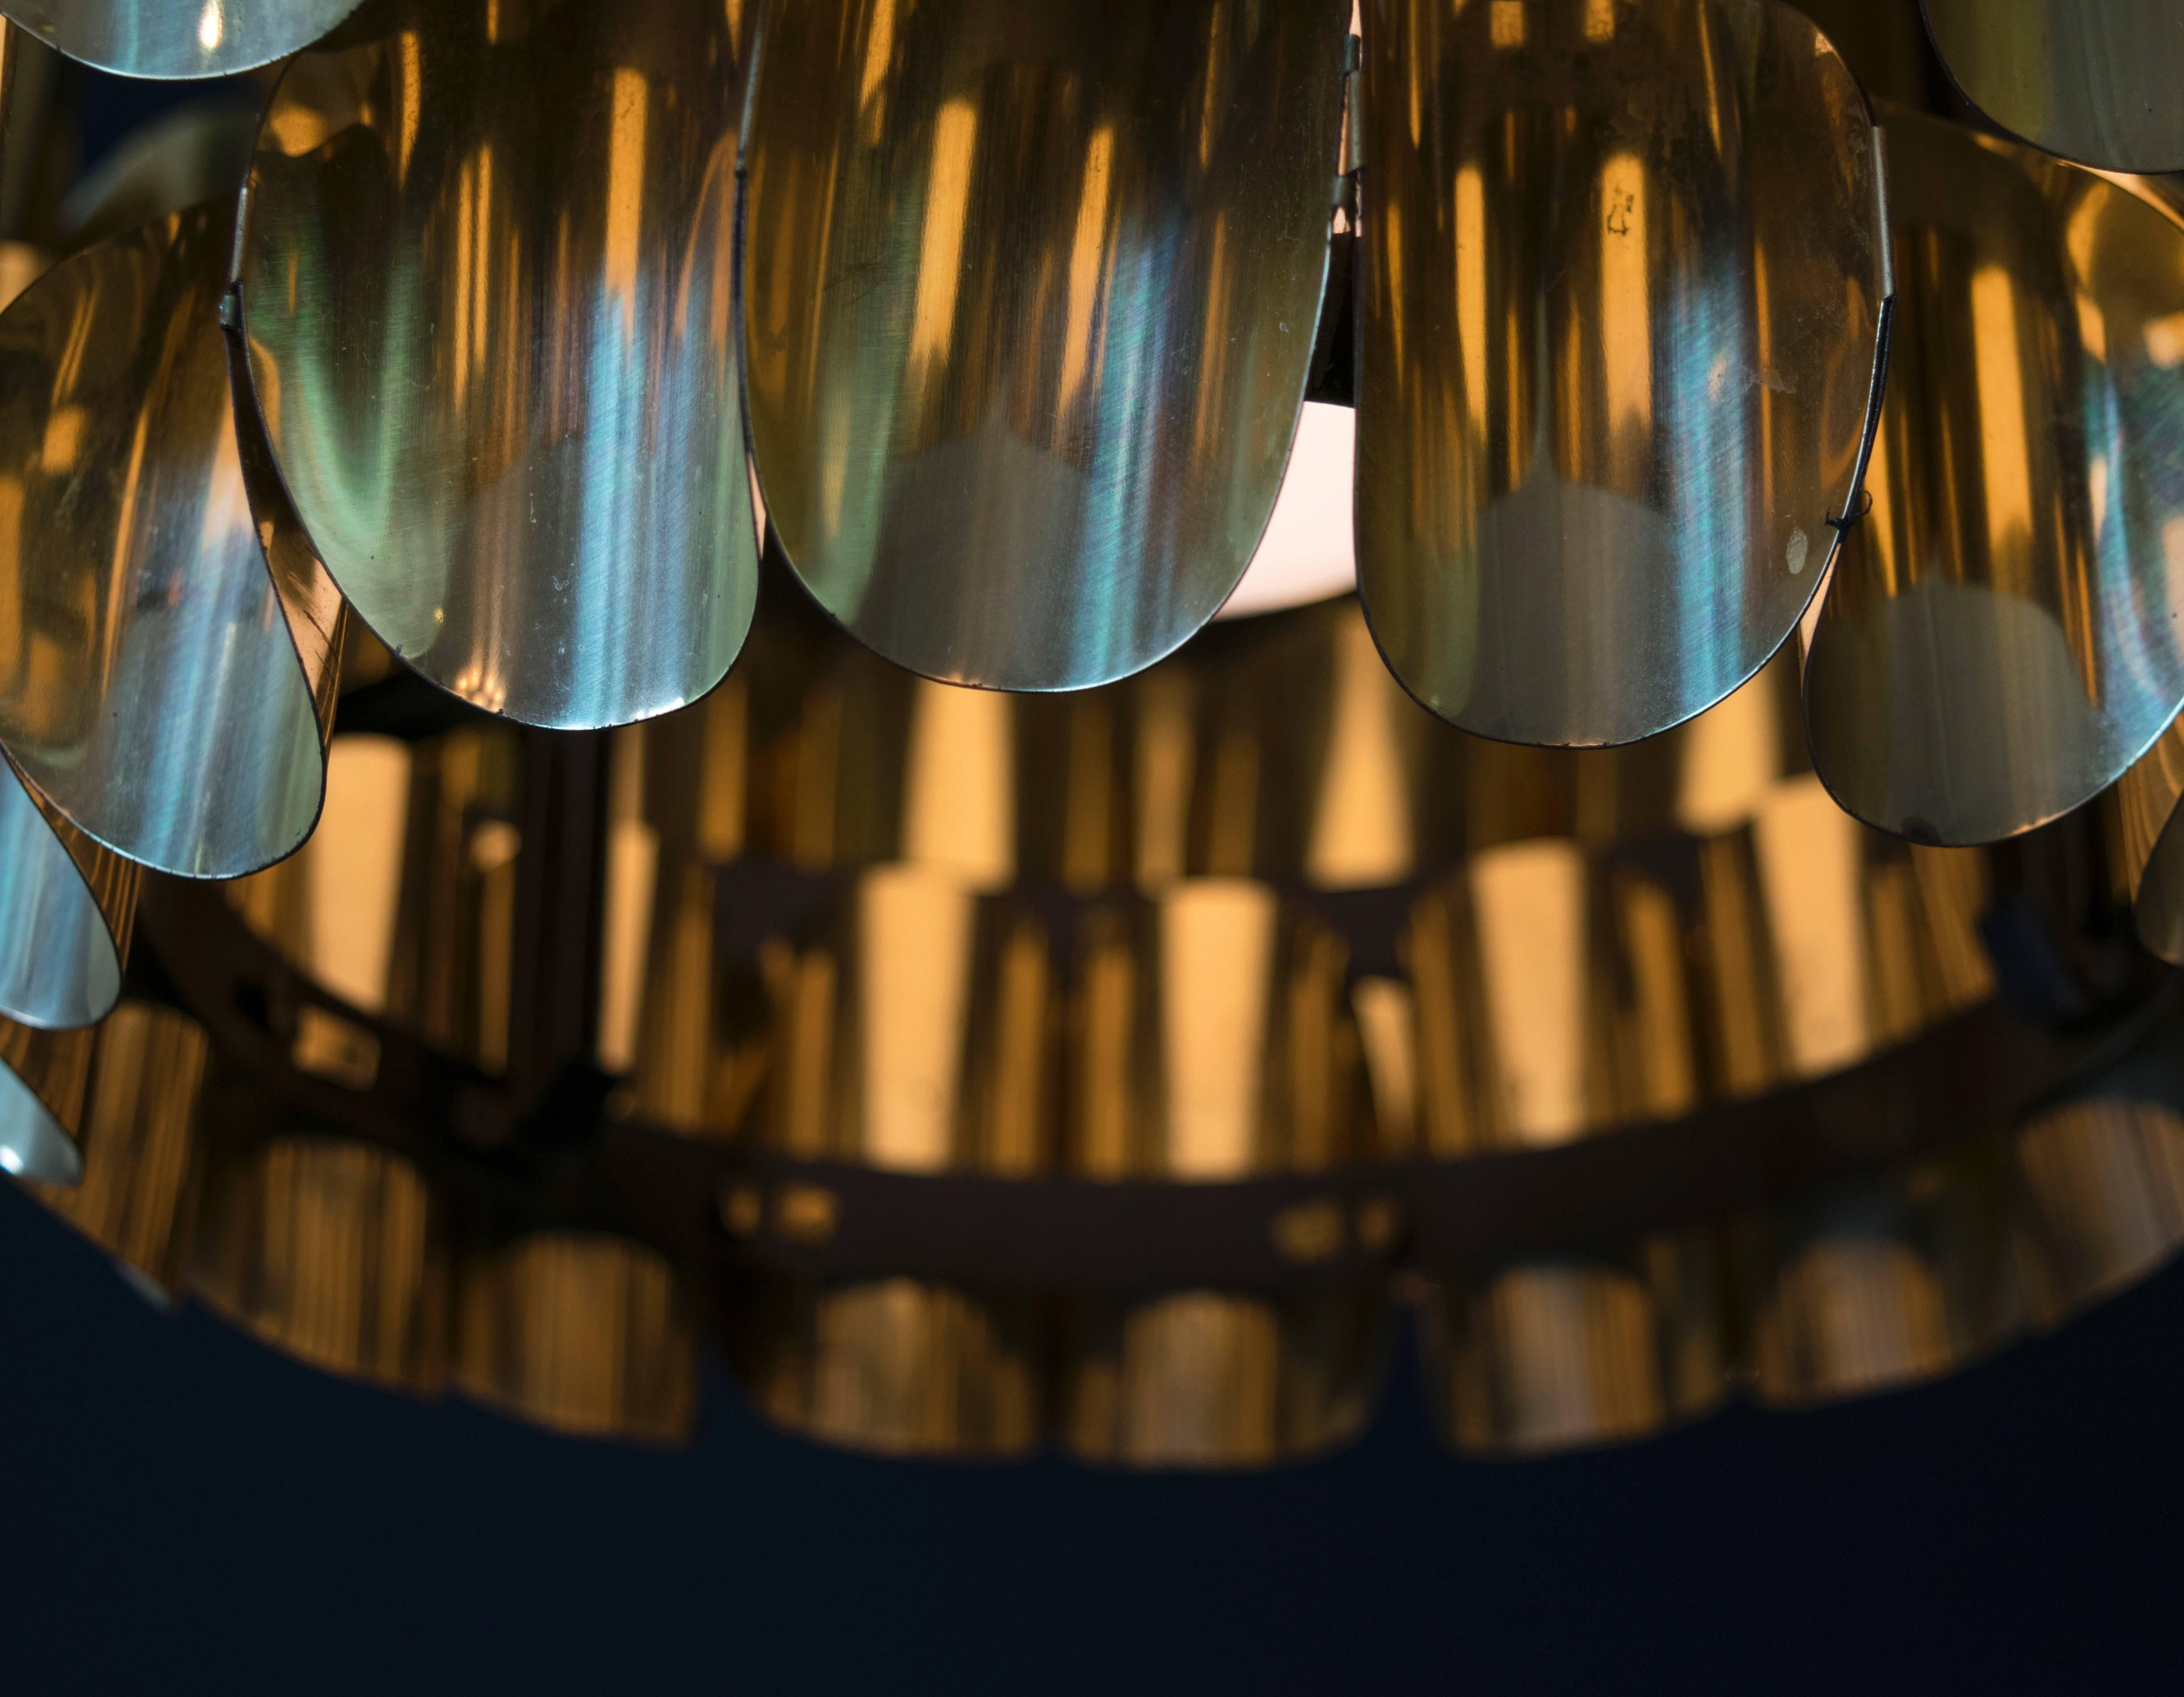 Scandinavian lighting at its finest. This Jakobsson pendant chandelier has five tiers of sculptural brass concave ovals that look like pringle chips fastened together to create a dynamic and bold fixture.